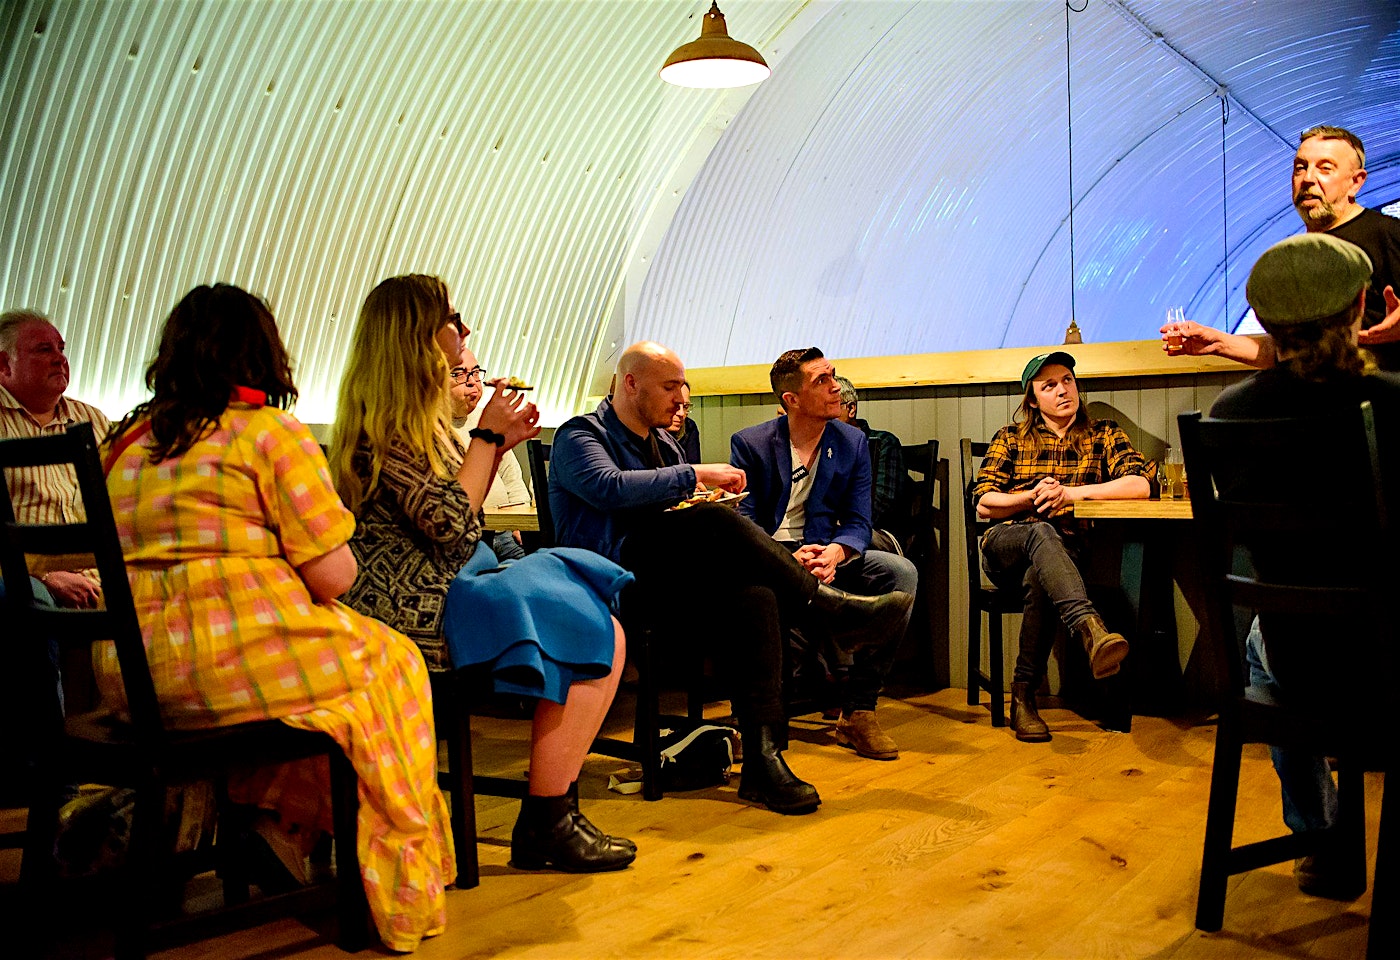 people inside the arch house taproom in bermondsey london